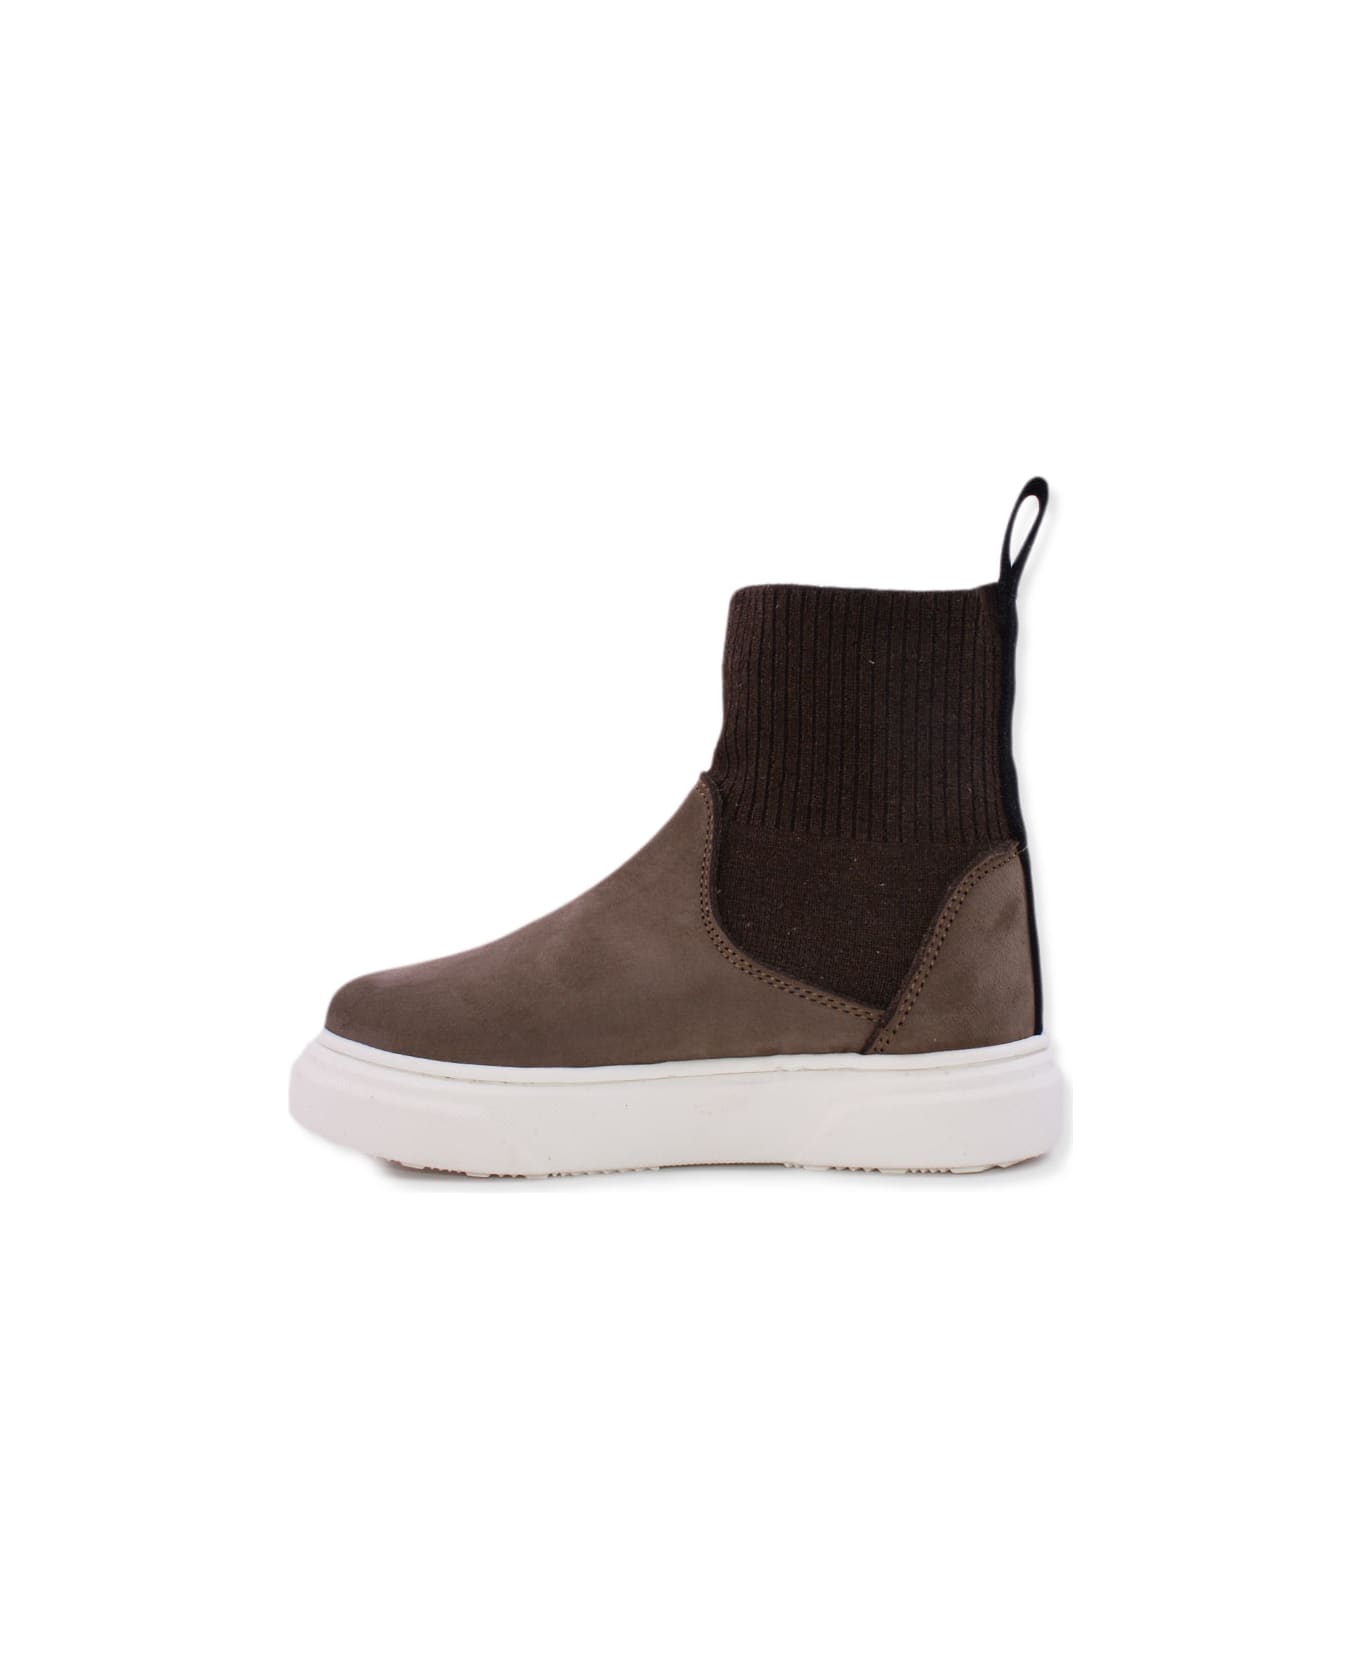 Andrea Montelpare Ankle Boot In Suede Leather - Brown